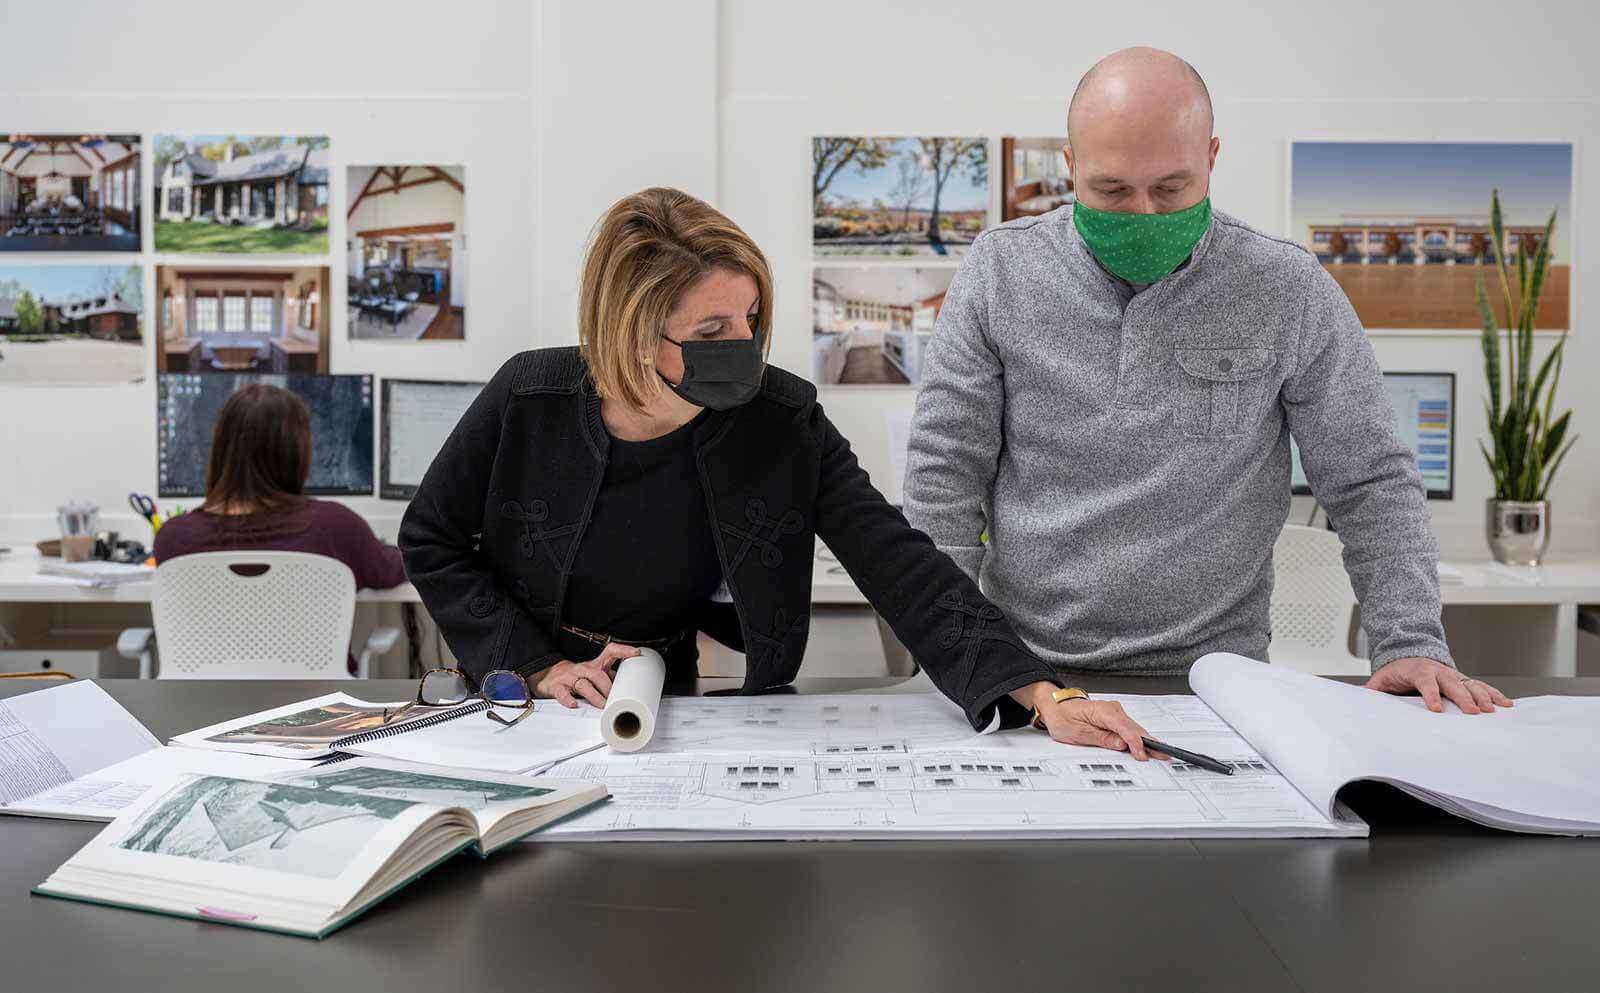 Two masked people stand at a desk looking at architecture sketches.